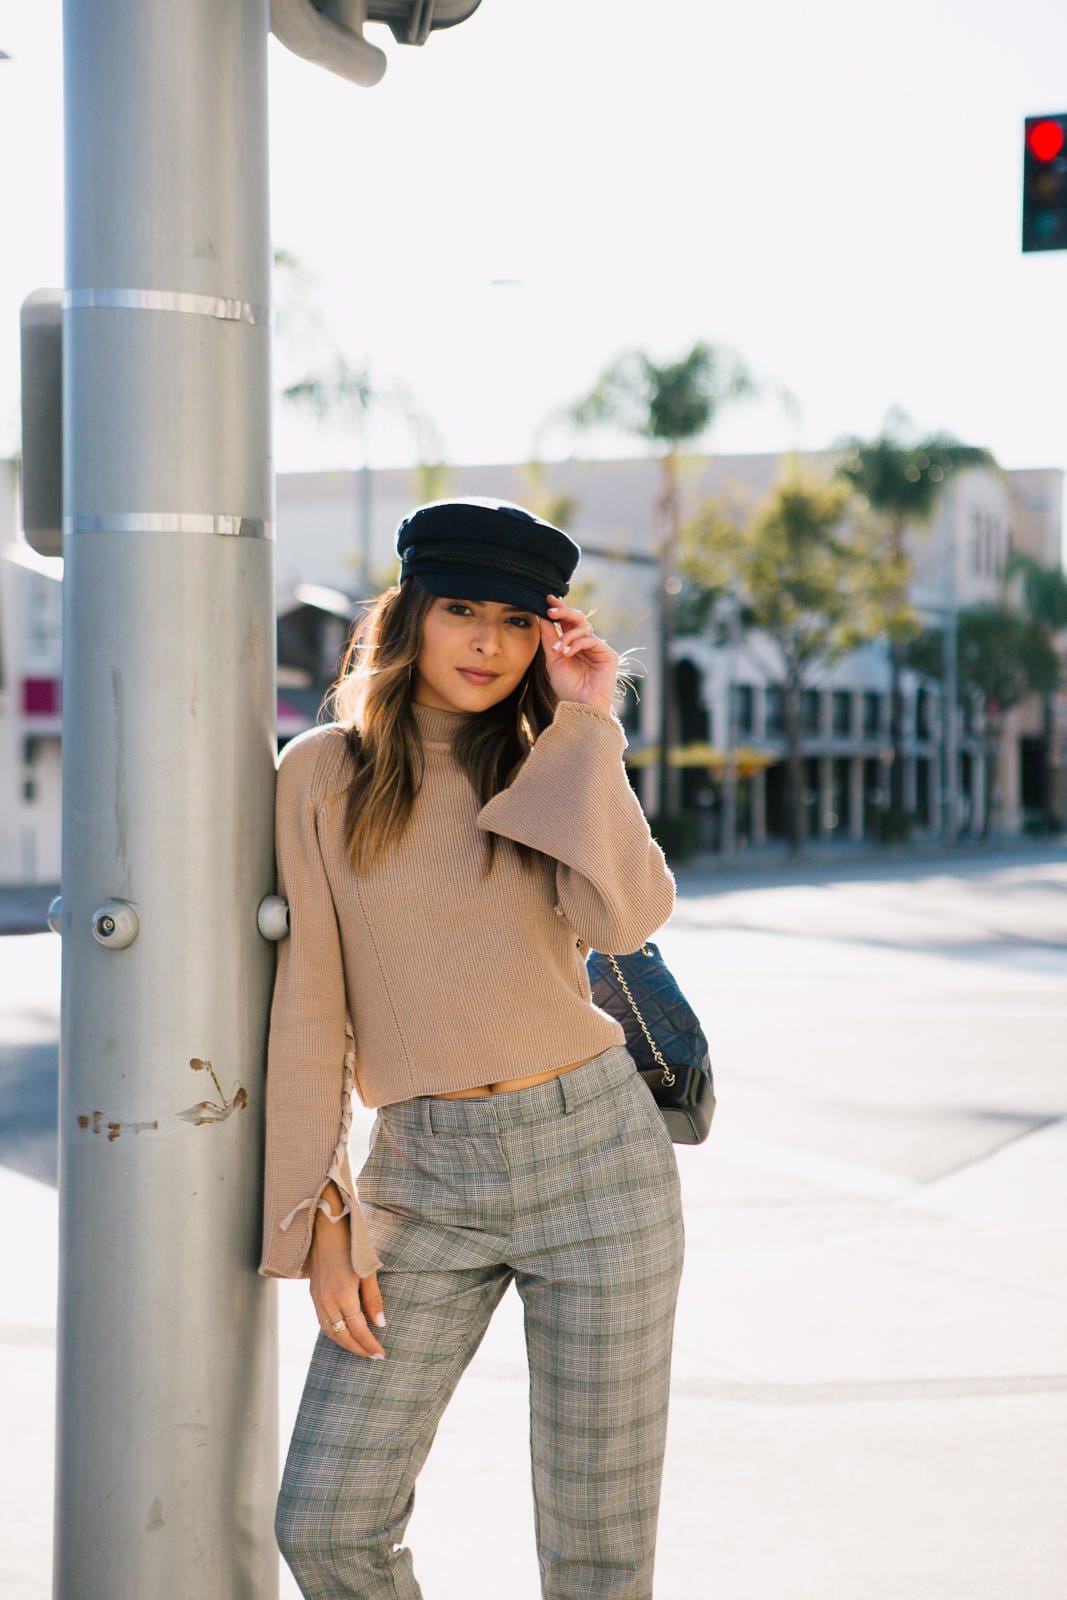 How to Style Plaid Pants 2 Ways - The 